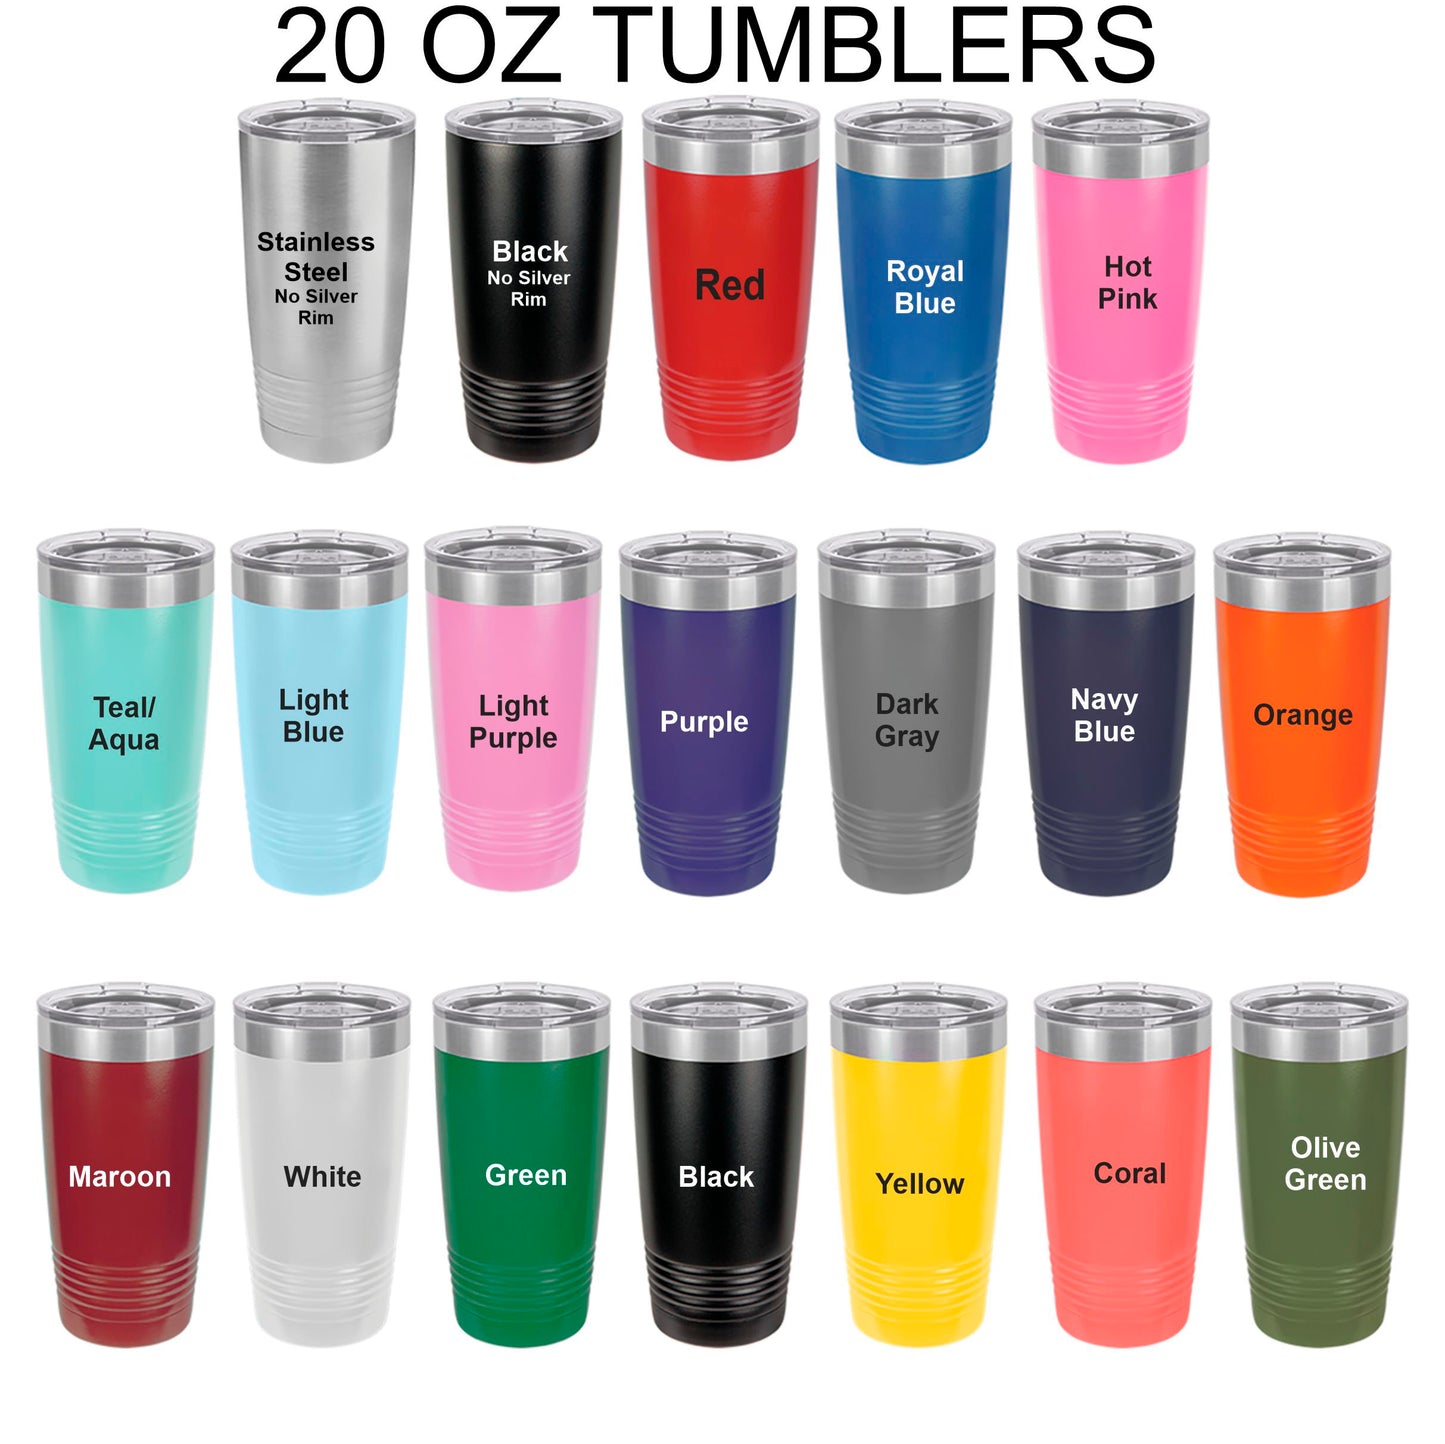 Soccer Coach Tumbler/ A Good Coach Can Change A Match/ Soccer Coach Gift/ Engraved On Both Sides/ Available Personalized/Coach Tumbler/20 oz